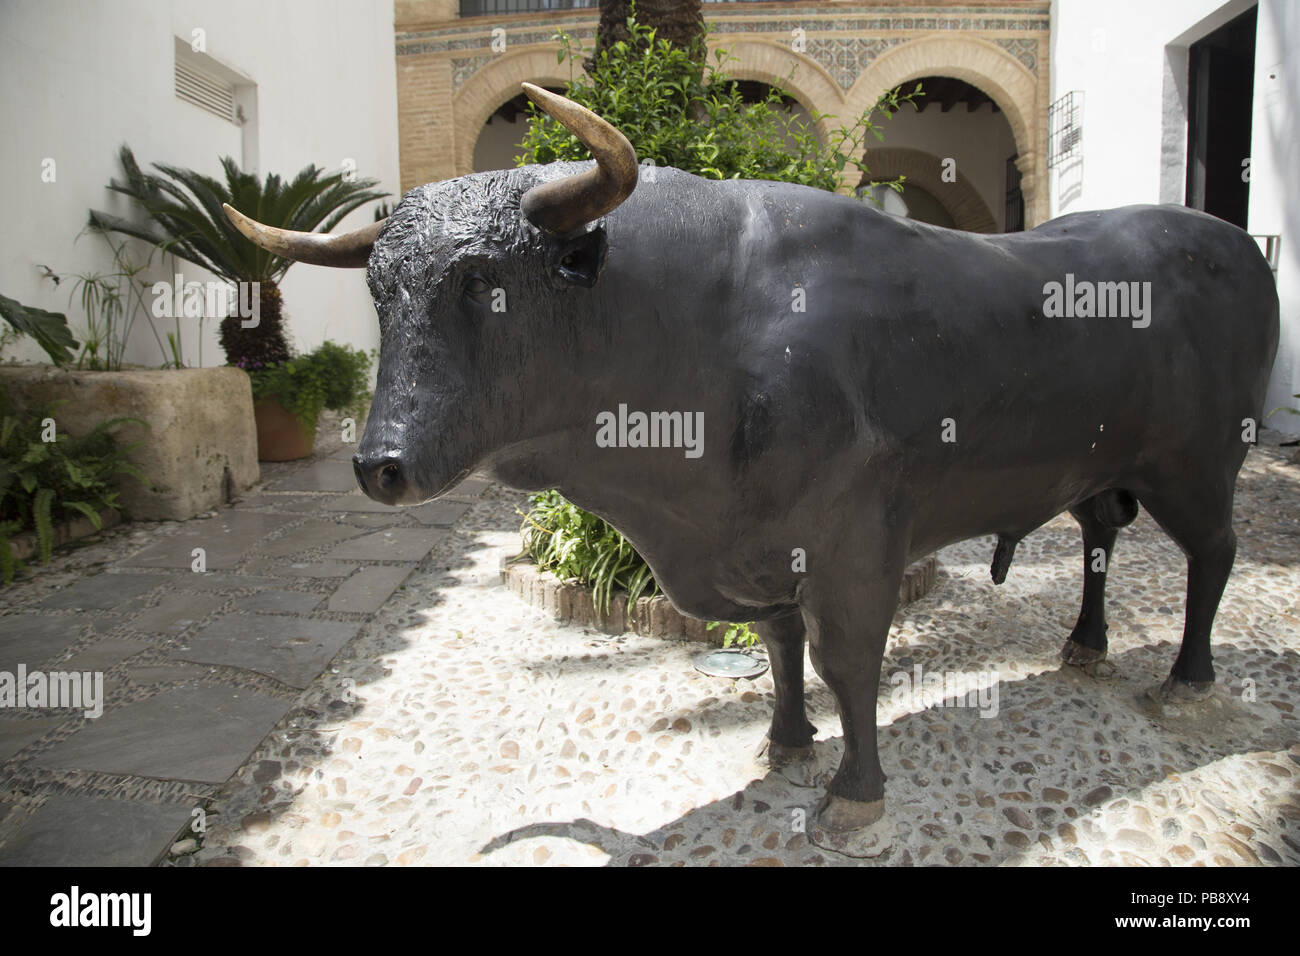 June 12 18 Ca Rdoba Spain Bull In The Taurine Museum Of Cordoba Ca Rdoba Was The Capital Of The Later Hispania In The Times Of The Roman Republic Or Of The Betica